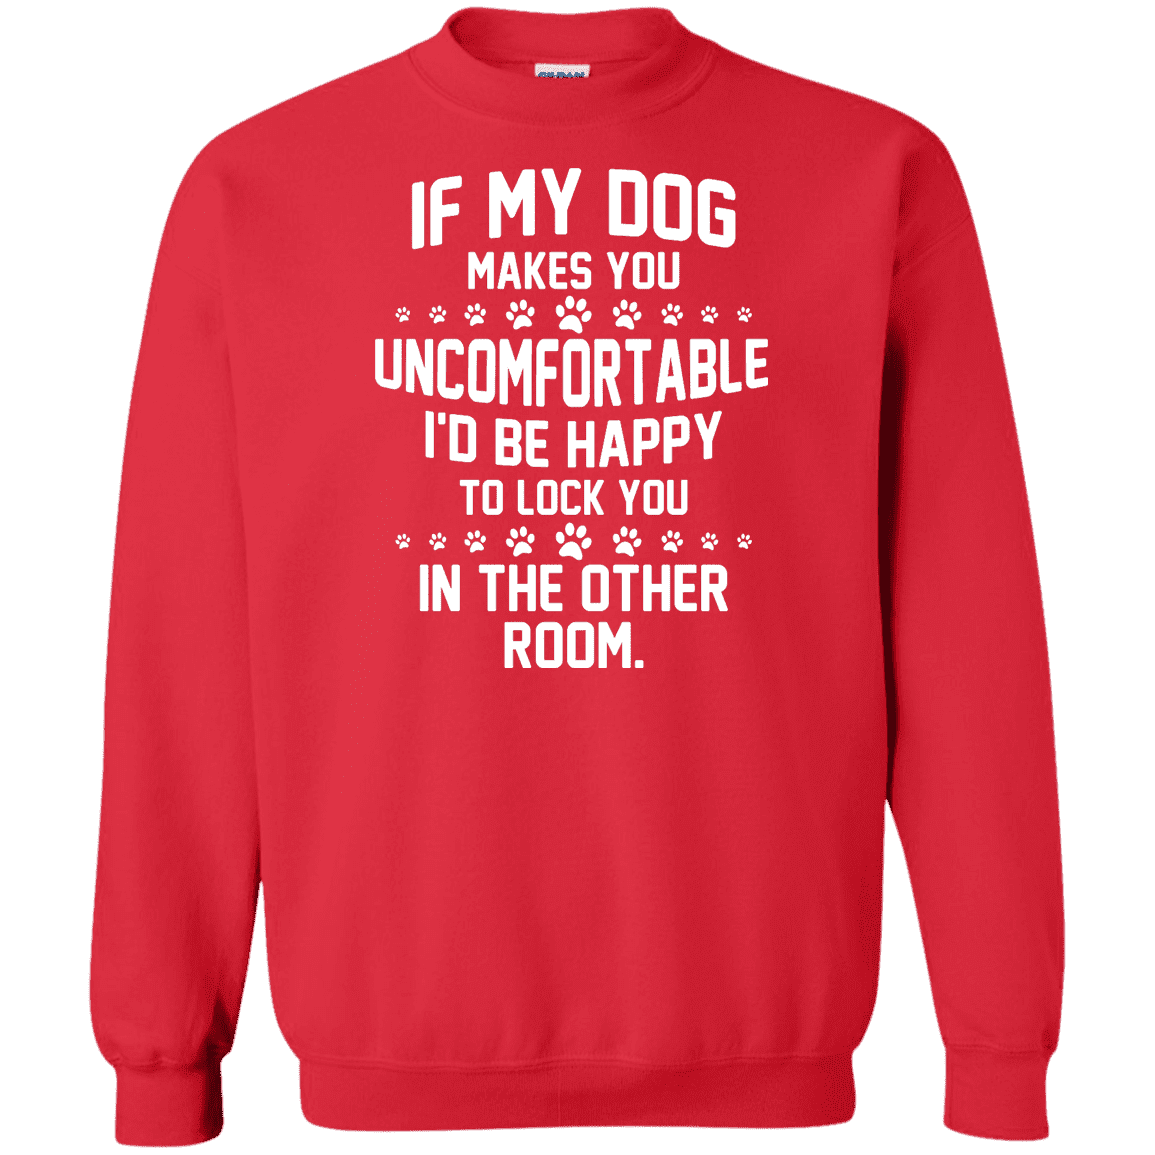 If My Dog Makes You Uncomfortable - Sweatshirt – Rescuers Club